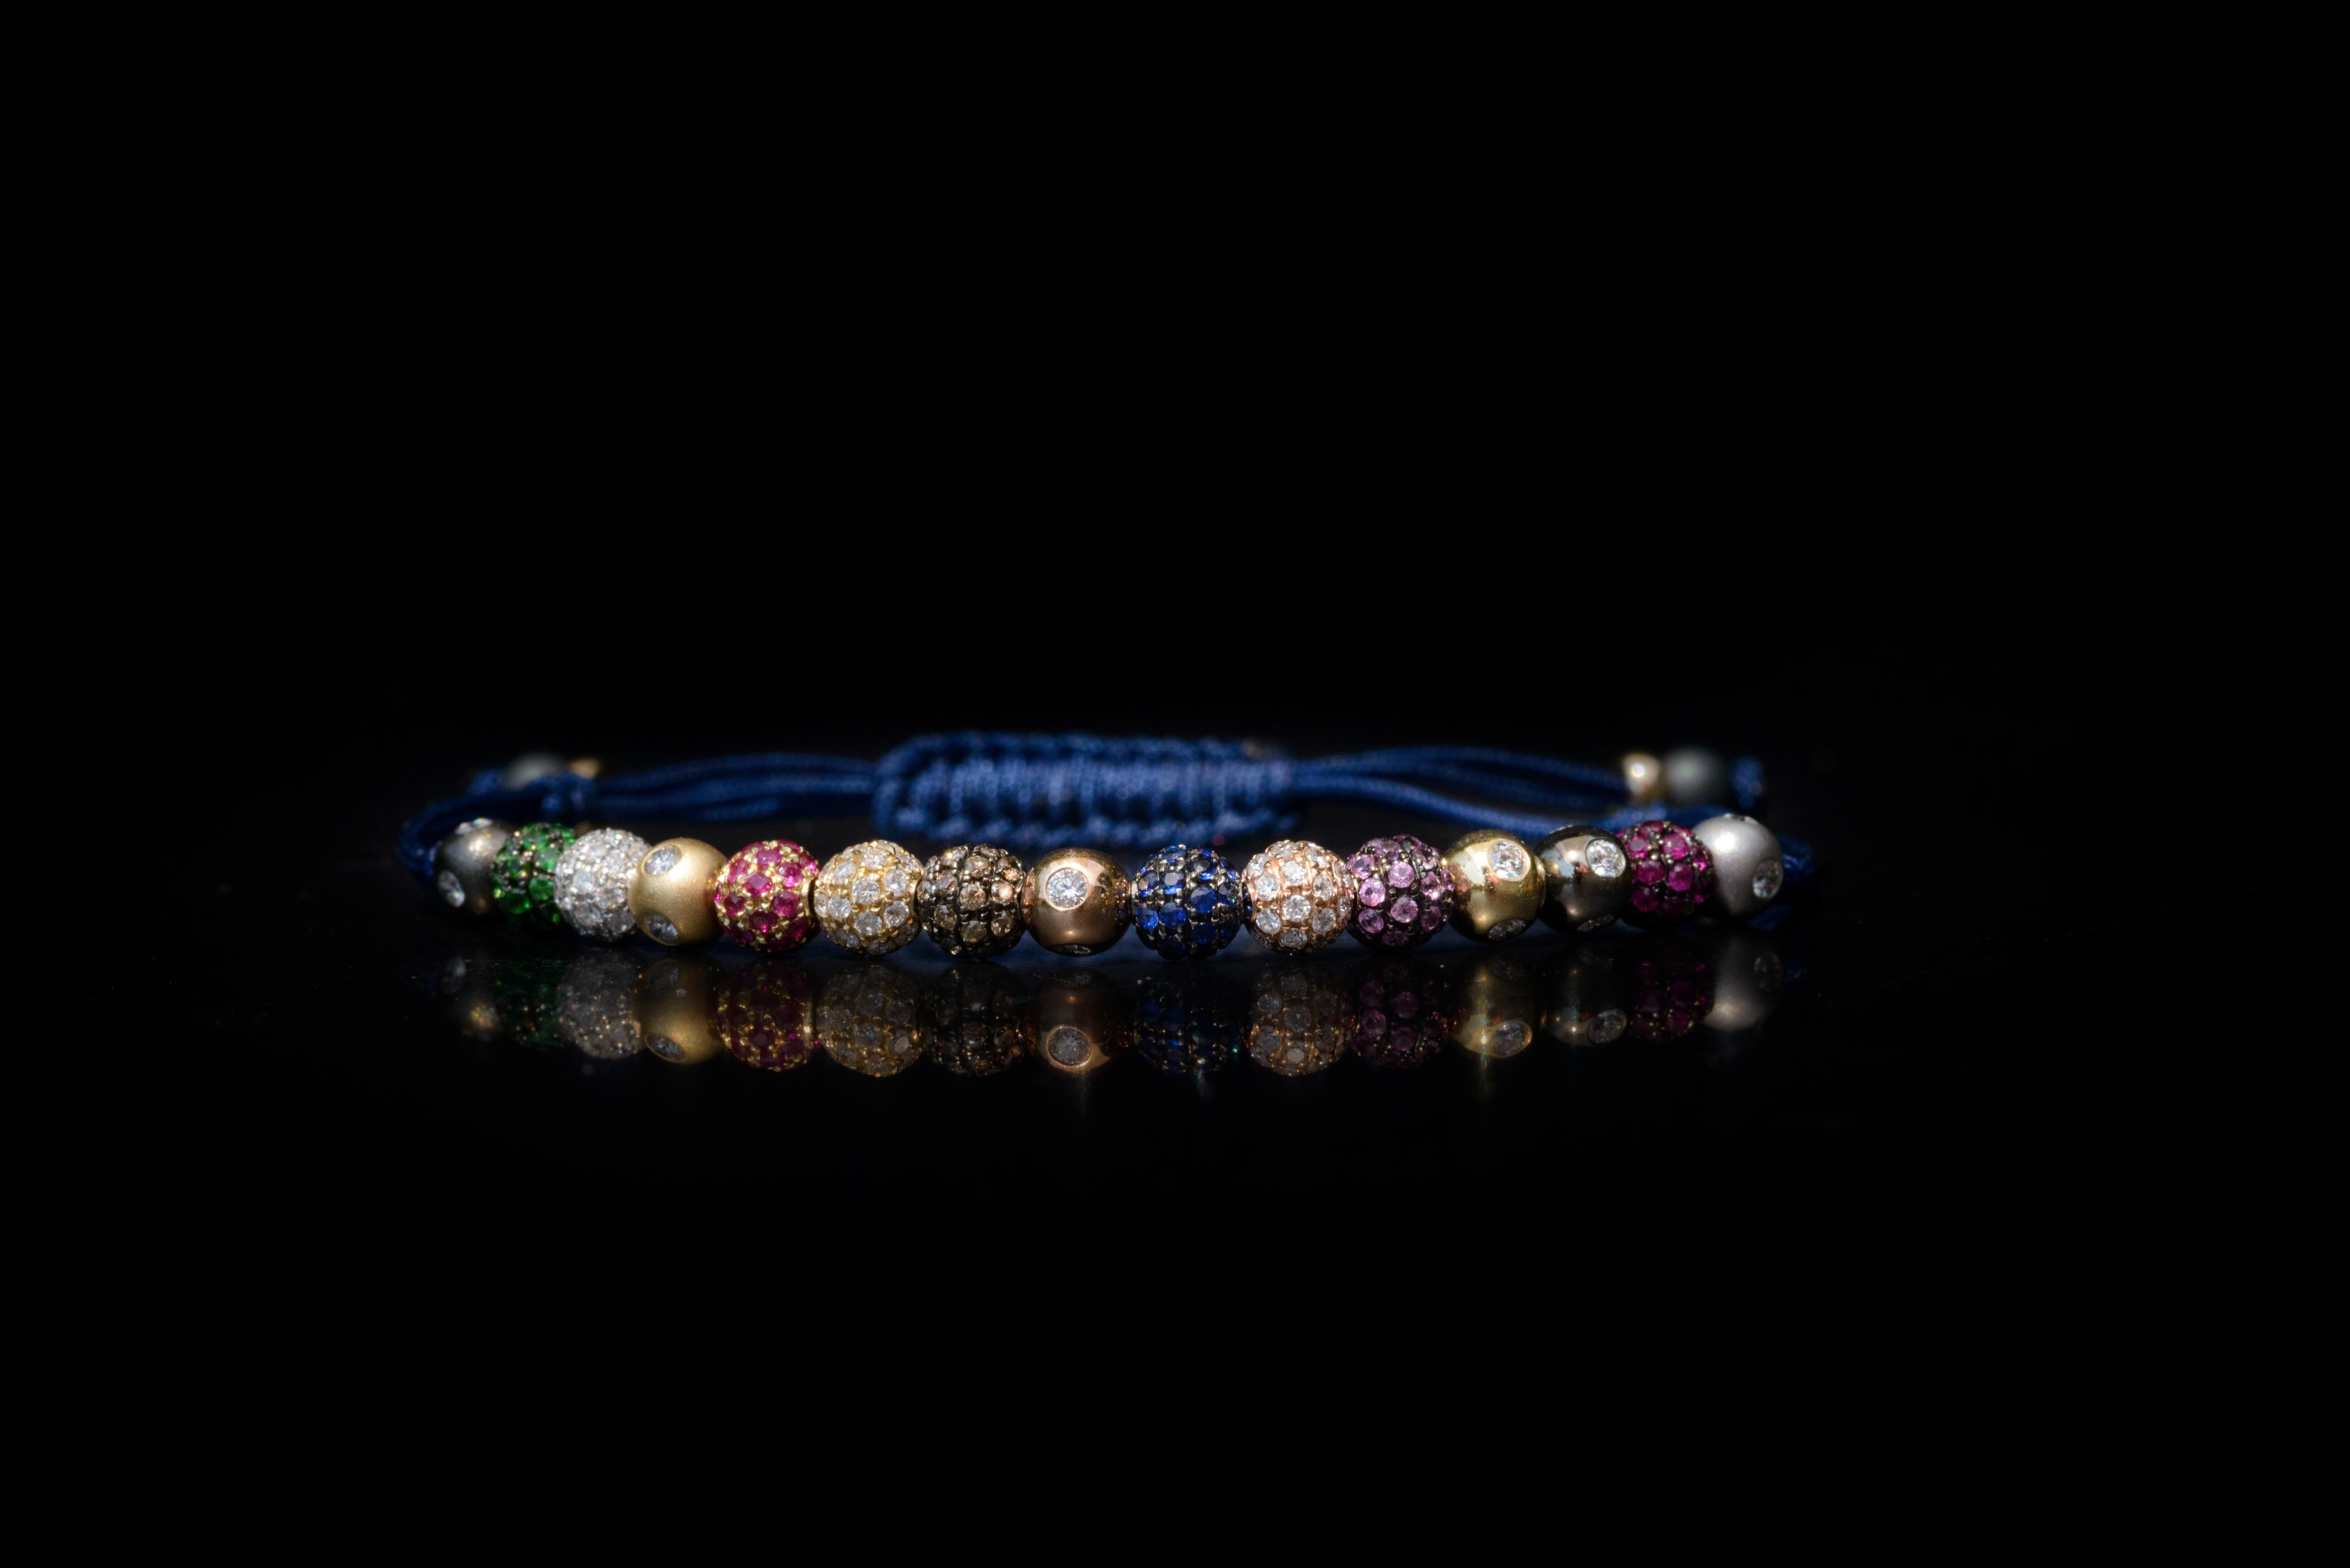 A bracelet made of a medley of fifteen 5mm pavé beads in 18 Karat yellow, white, black and rose Gold, with white and brown Diamonds, Rubies, Tsavorites, blue and pink Sapphires, in macramé (Ref. B.3)
Carat weight: White Diamond .48 CT / Ruby 1.09 CT